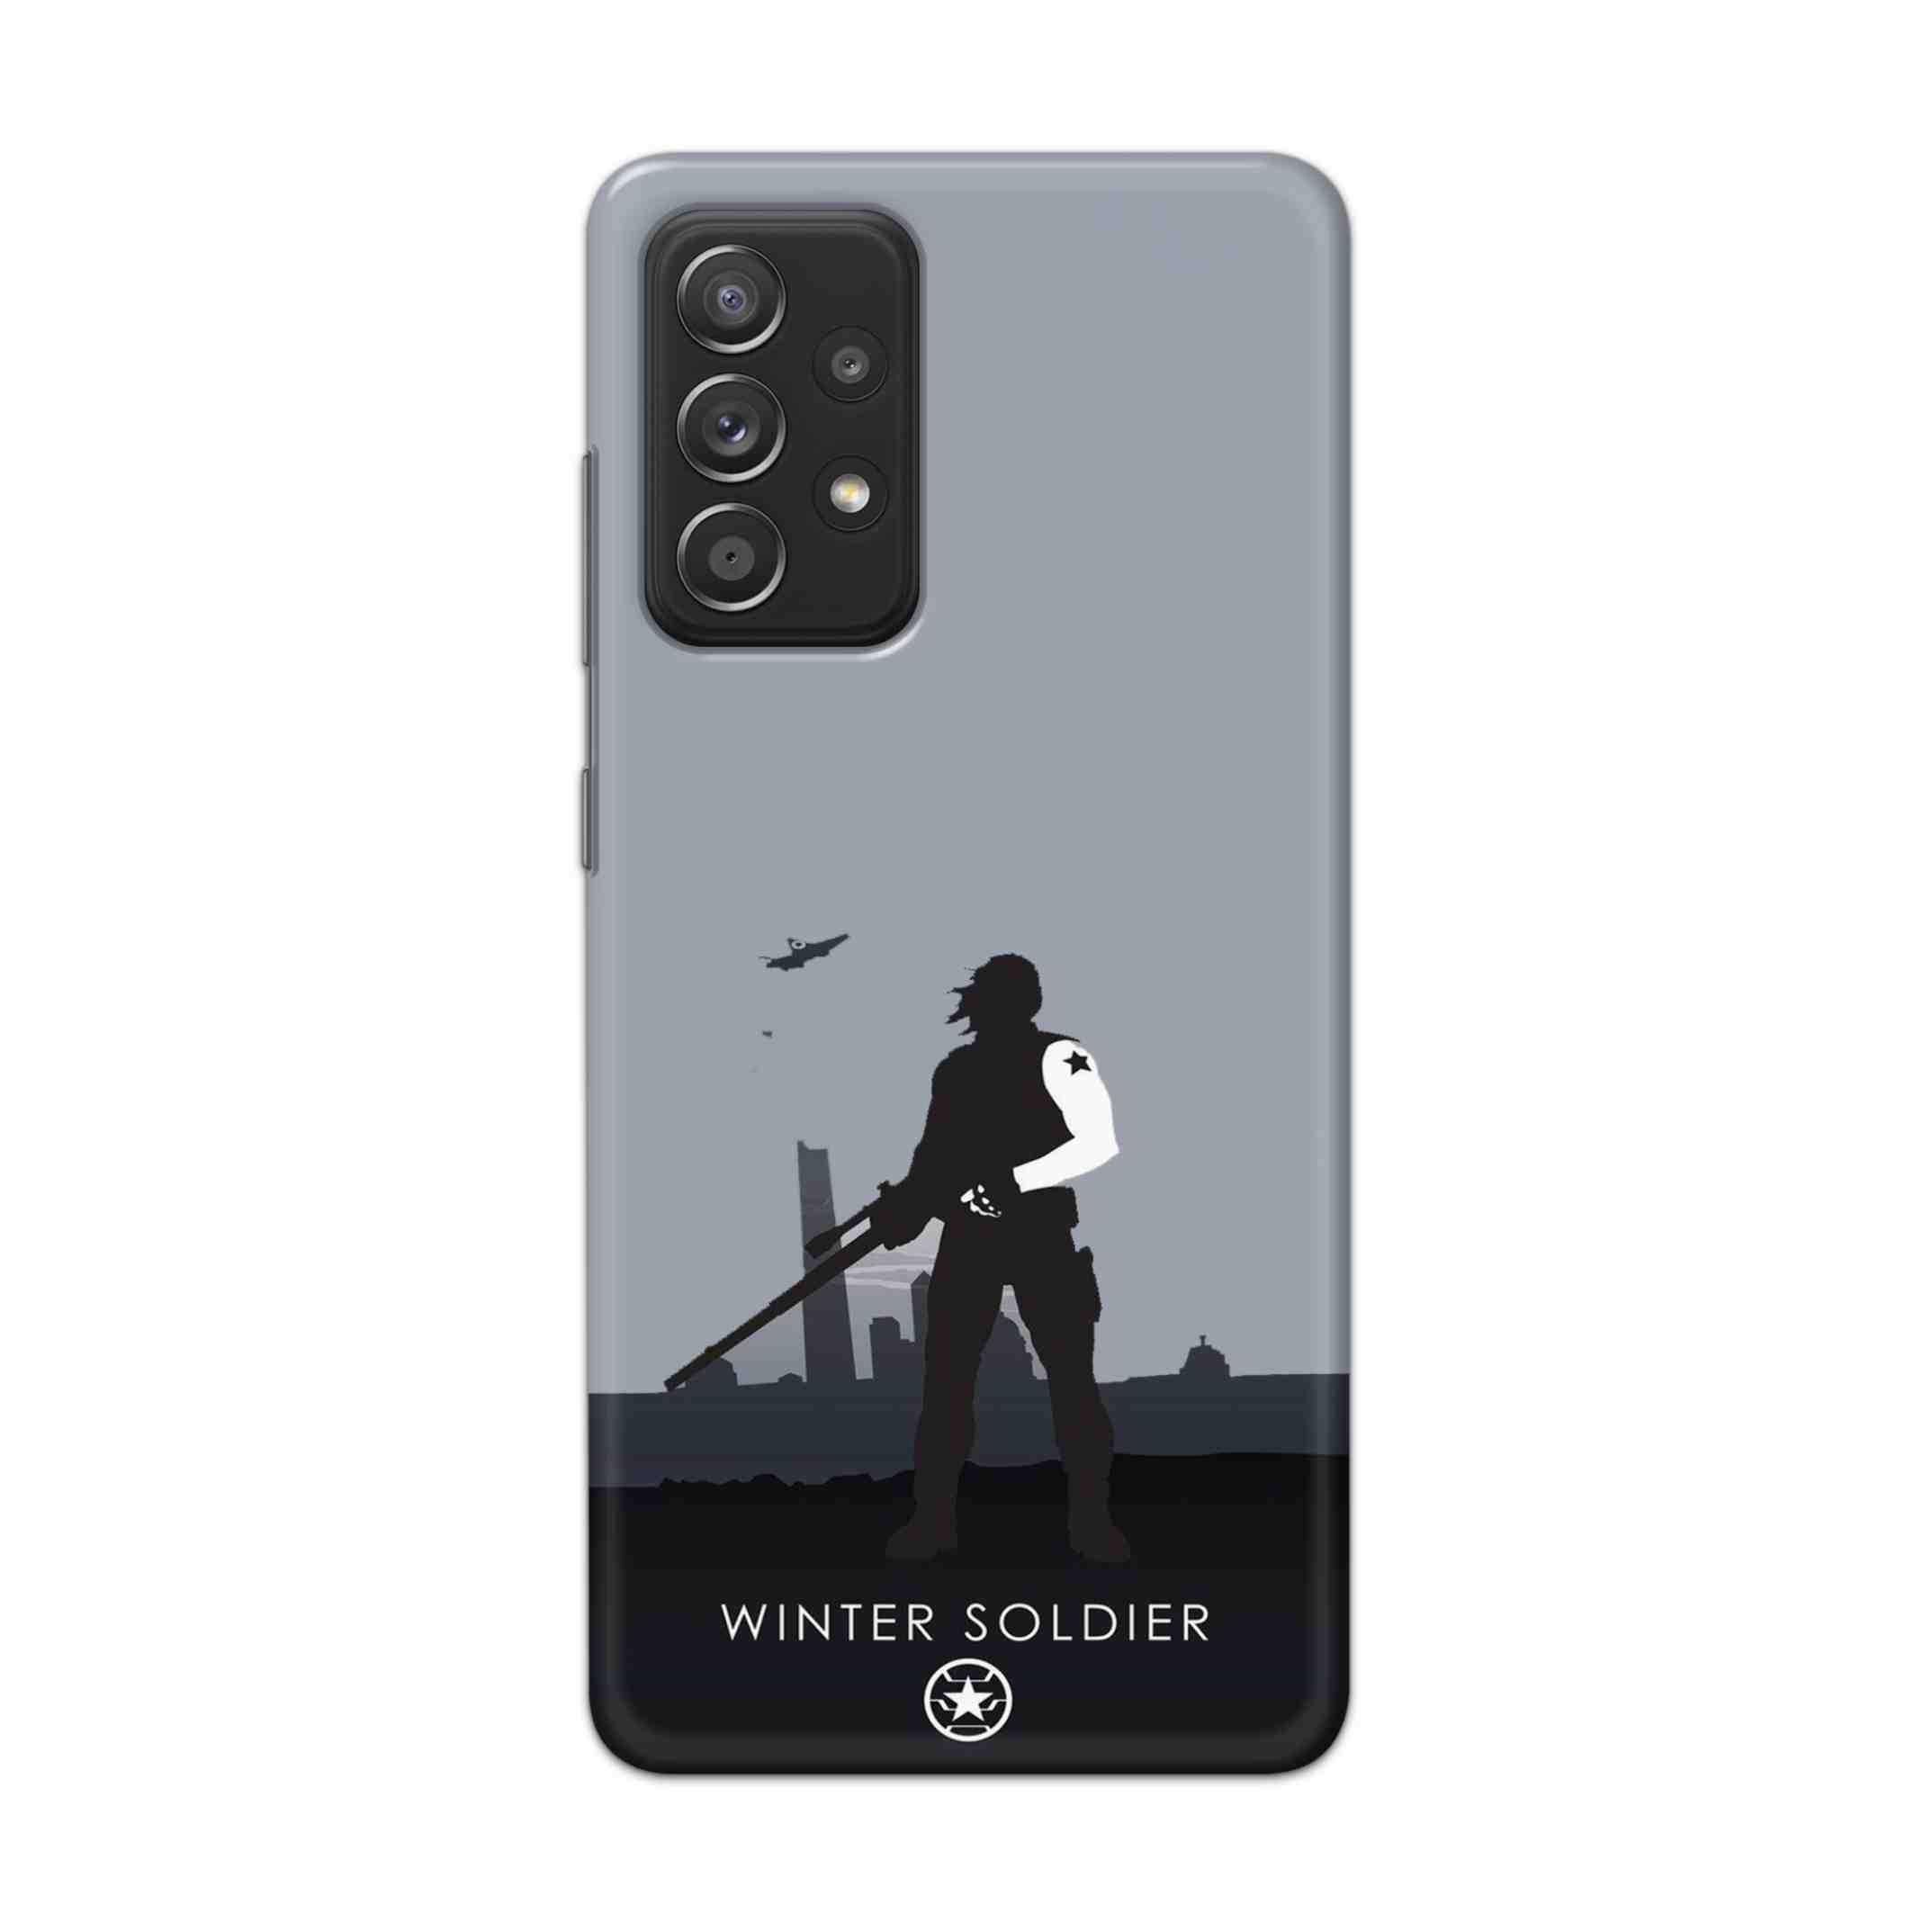 Buy Winter Soldier Hard Back Mobile Phone Case Cover For Samsung Galaxy A52 Online